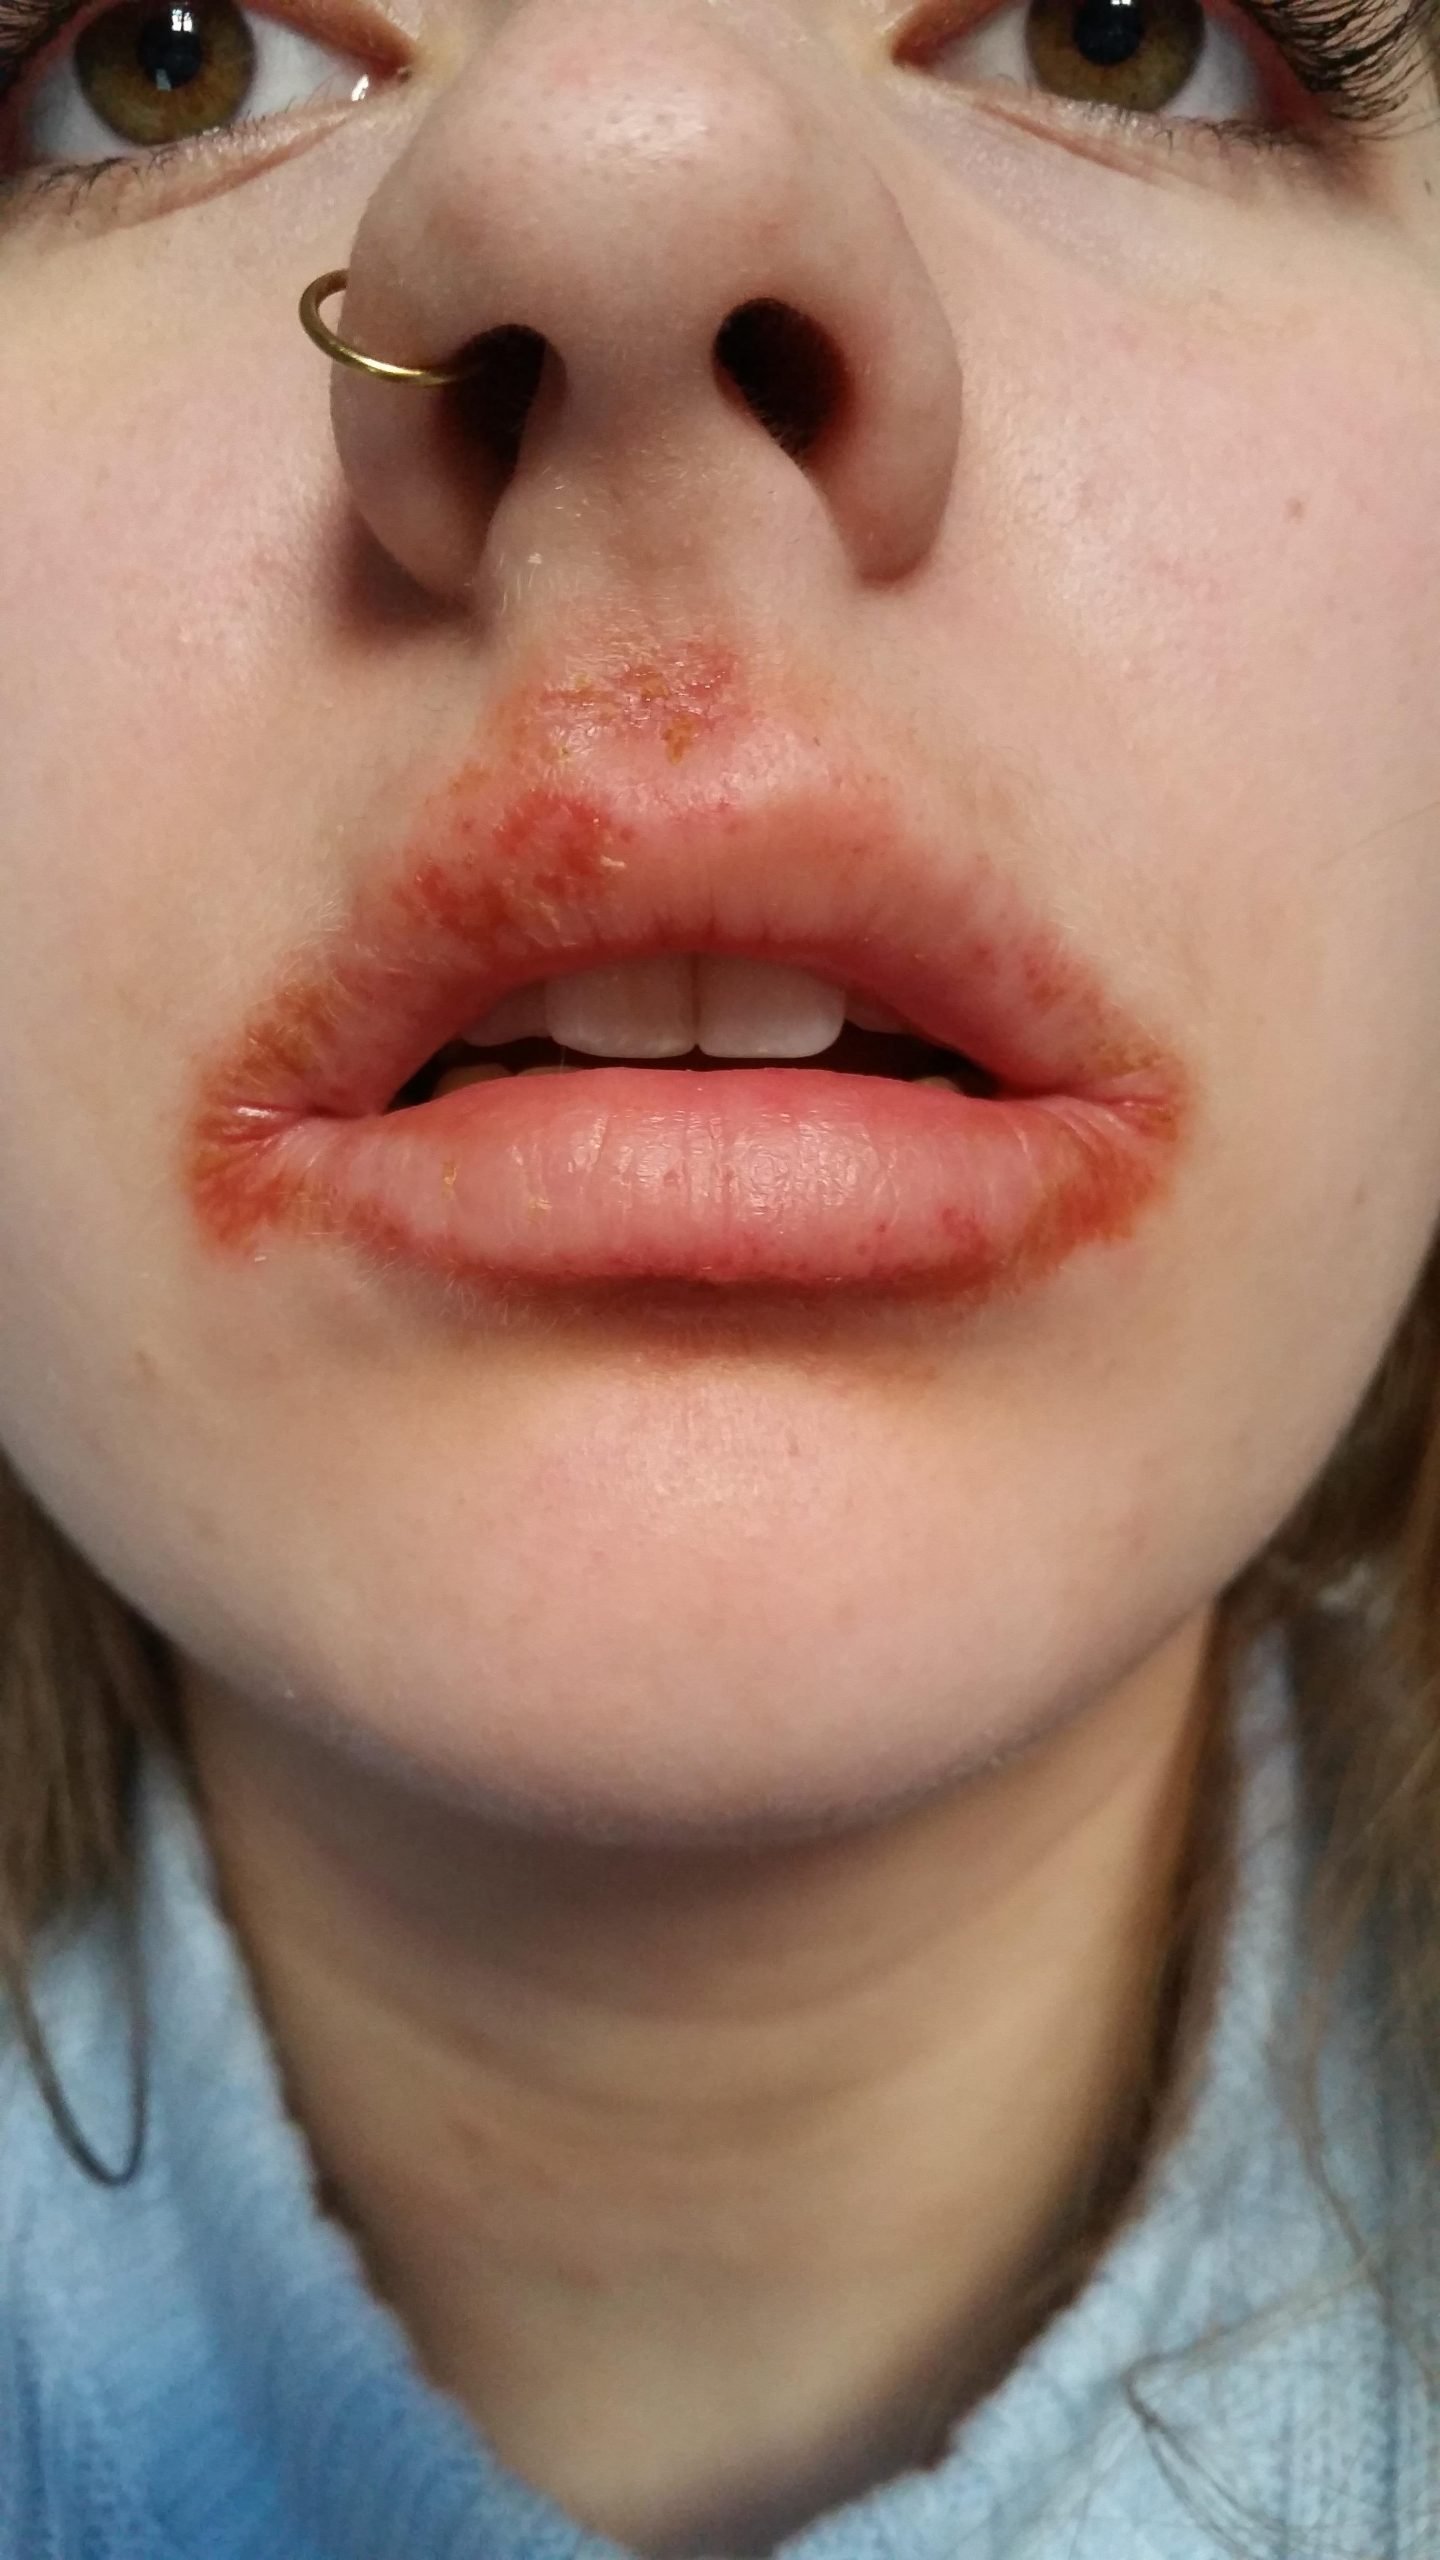 Struggling with this mouth eczema since nearly a year, I ...